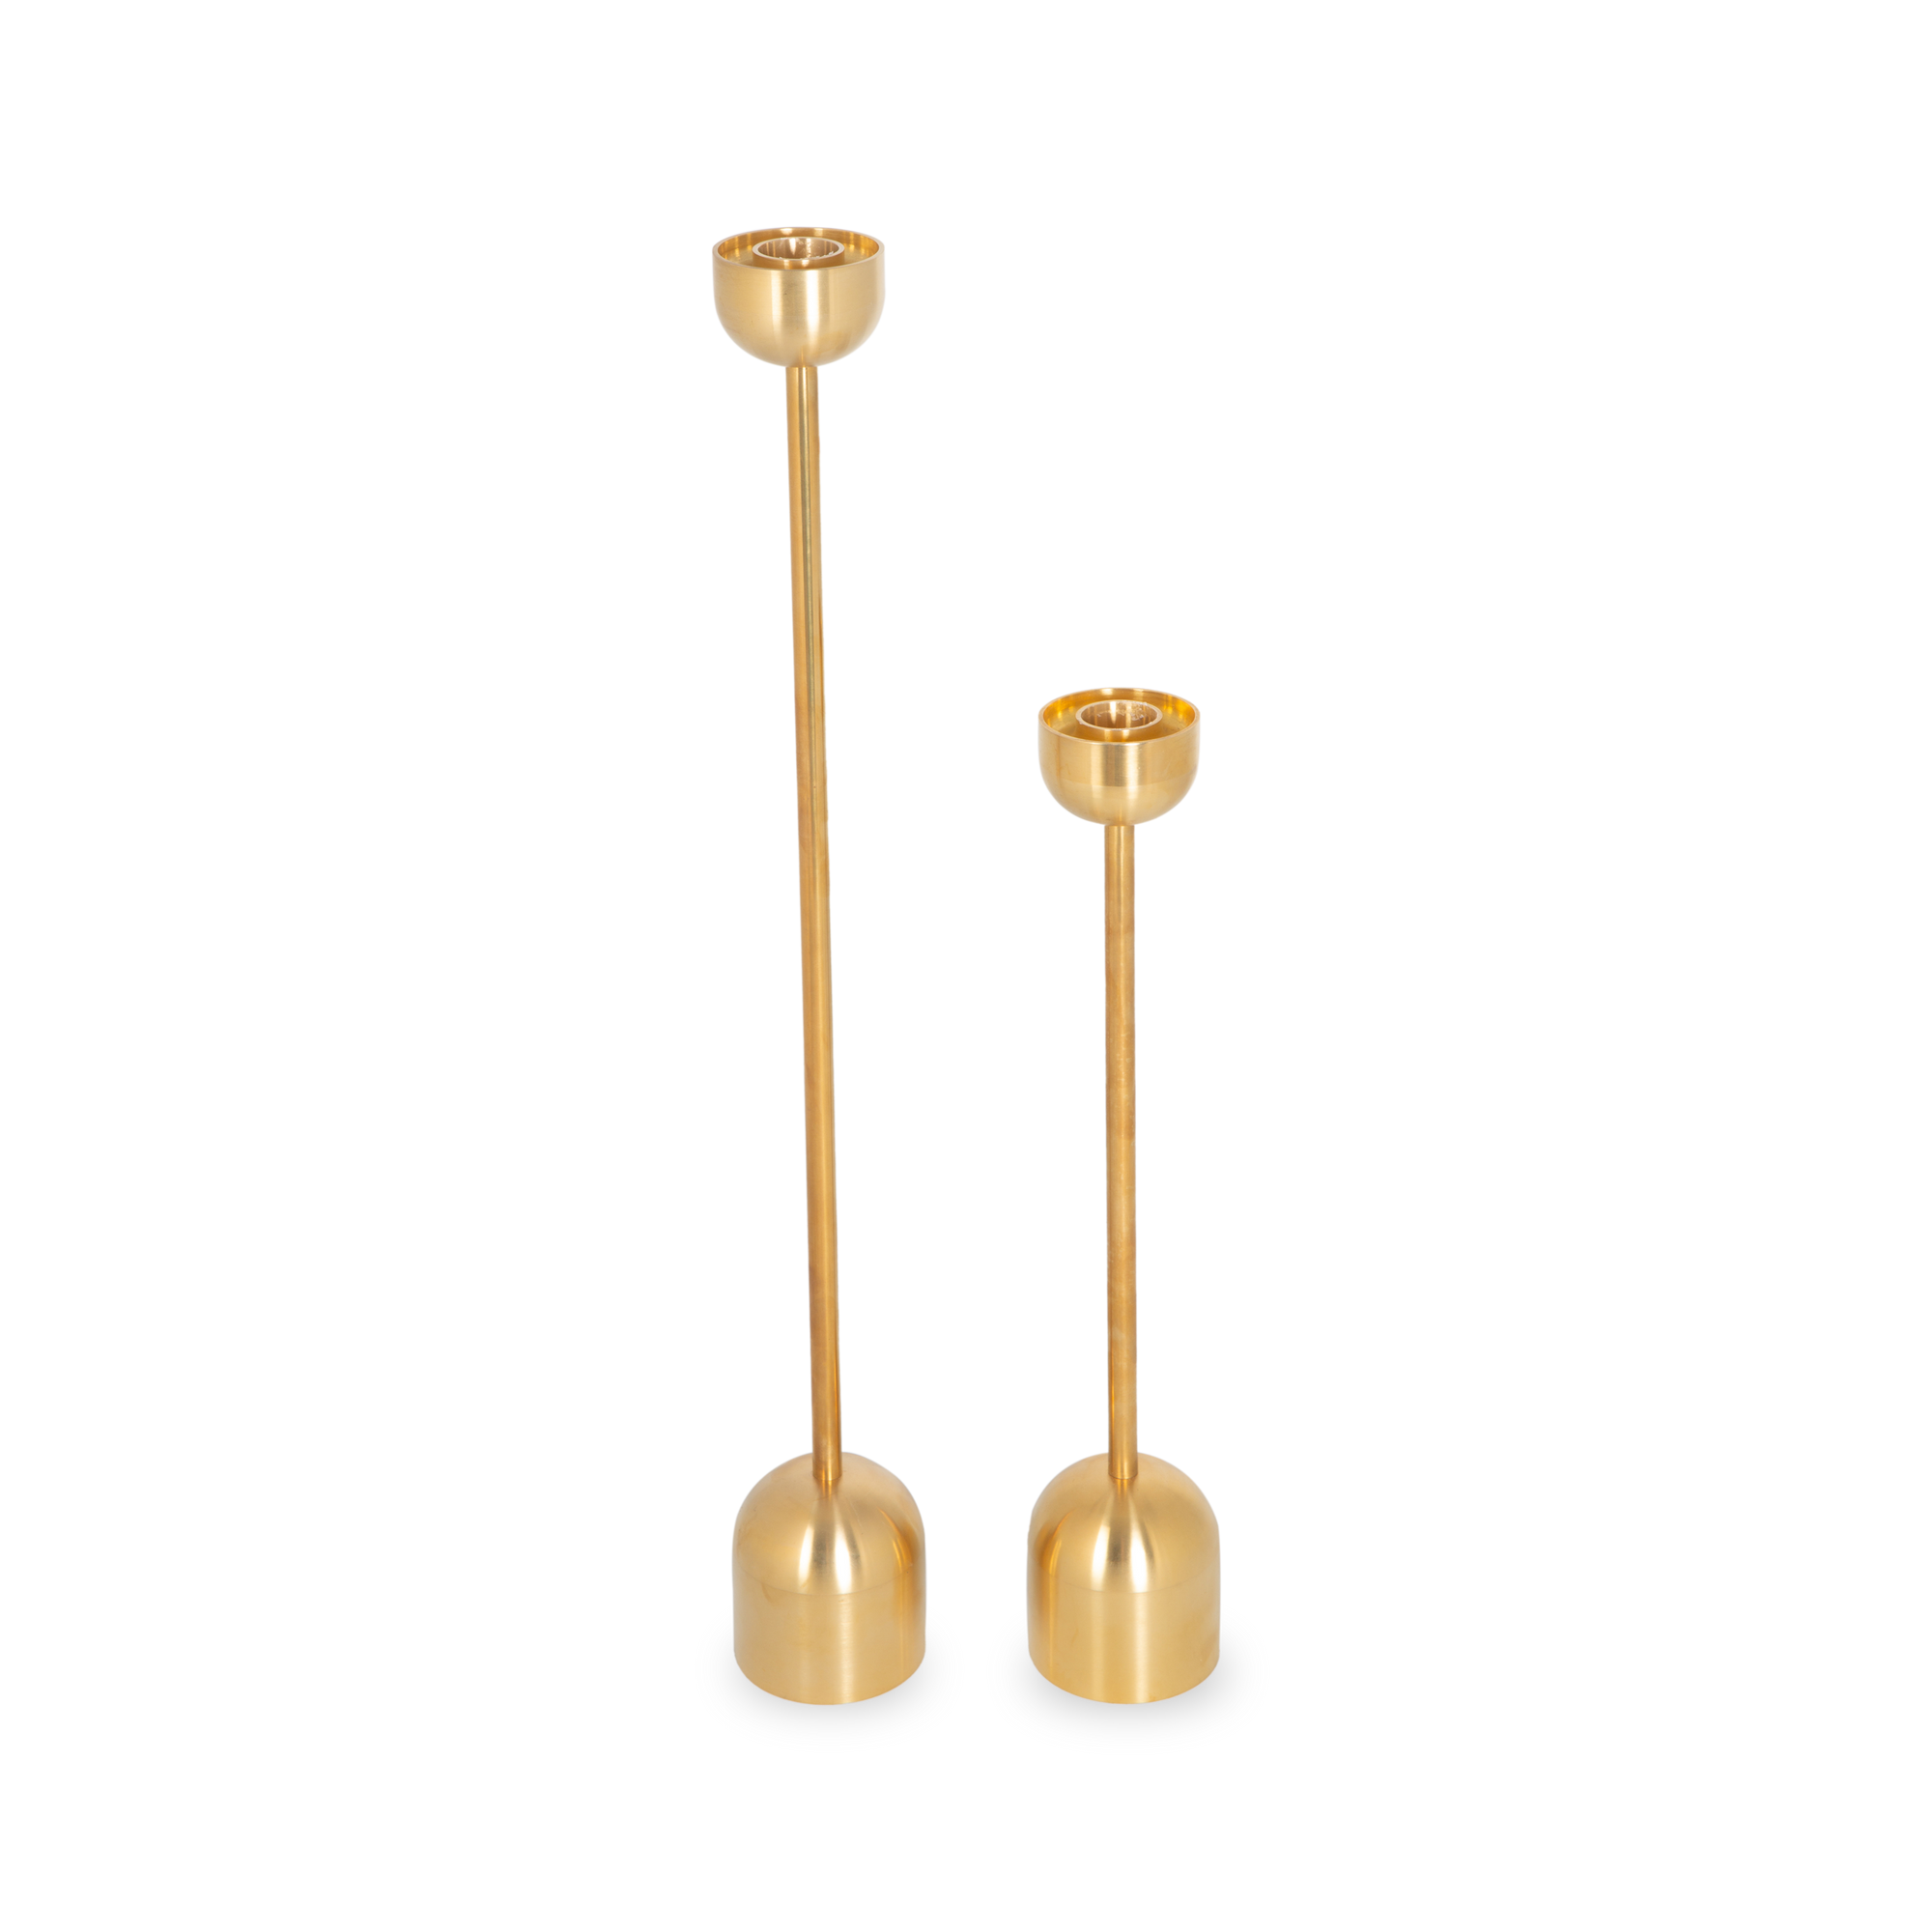 This tall, simple dome shaped candleholder collection is fashioned from solid brass.